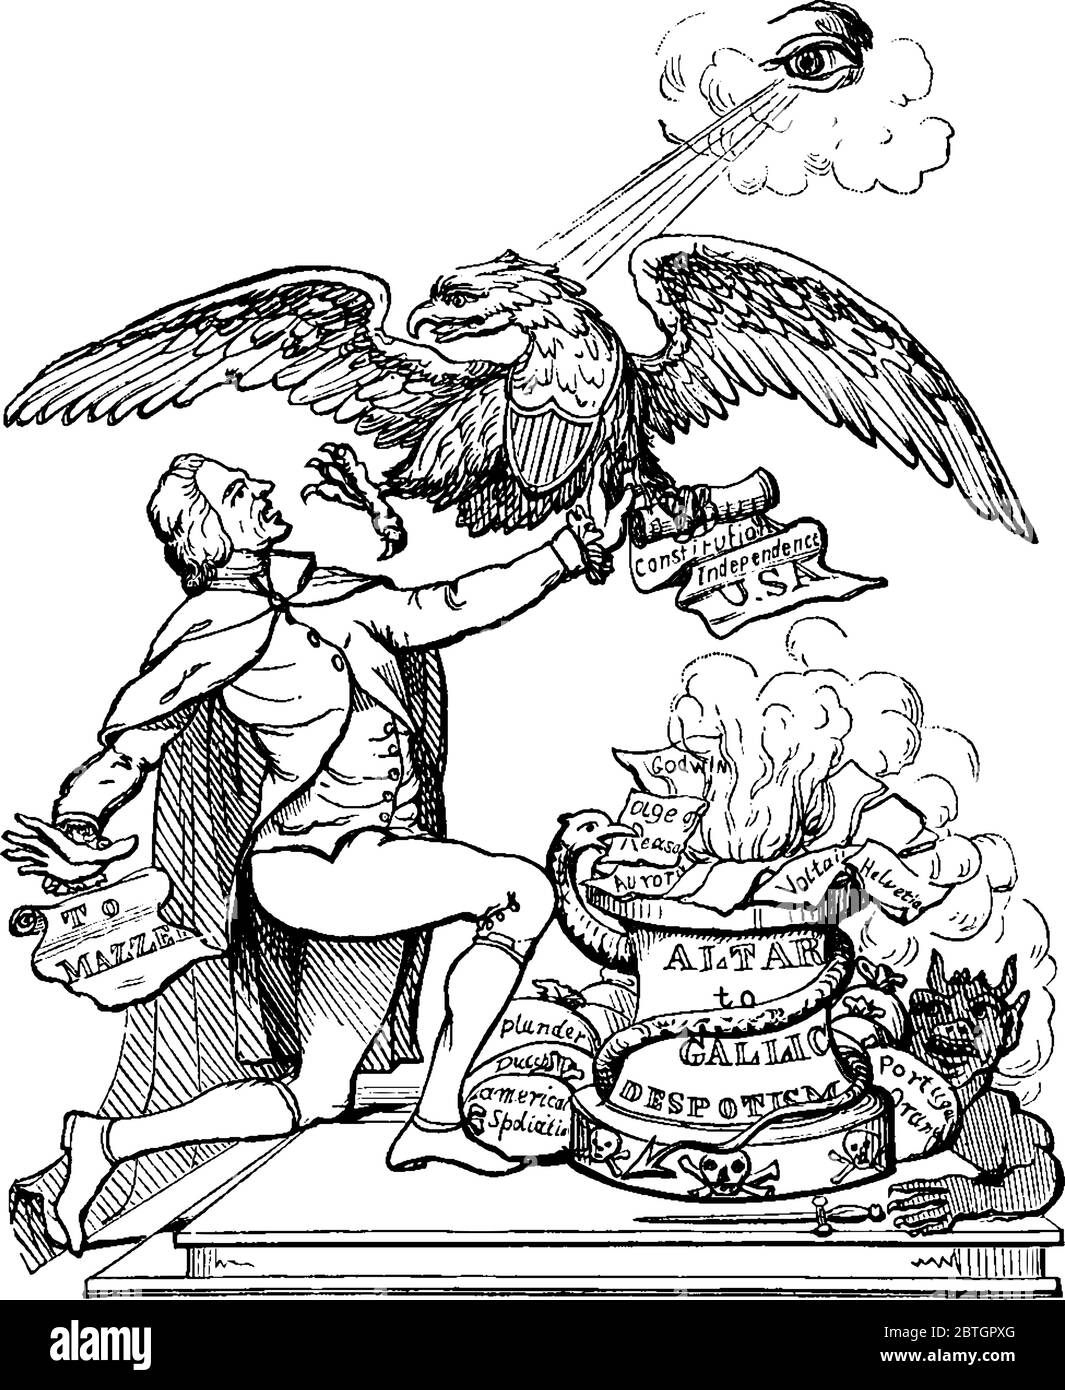 Thomas Jefferson, knelt down at an altar and an eagle trying to stop him from demolishing the Constitution, vintage line drawing or engraving illustra Stock Vector